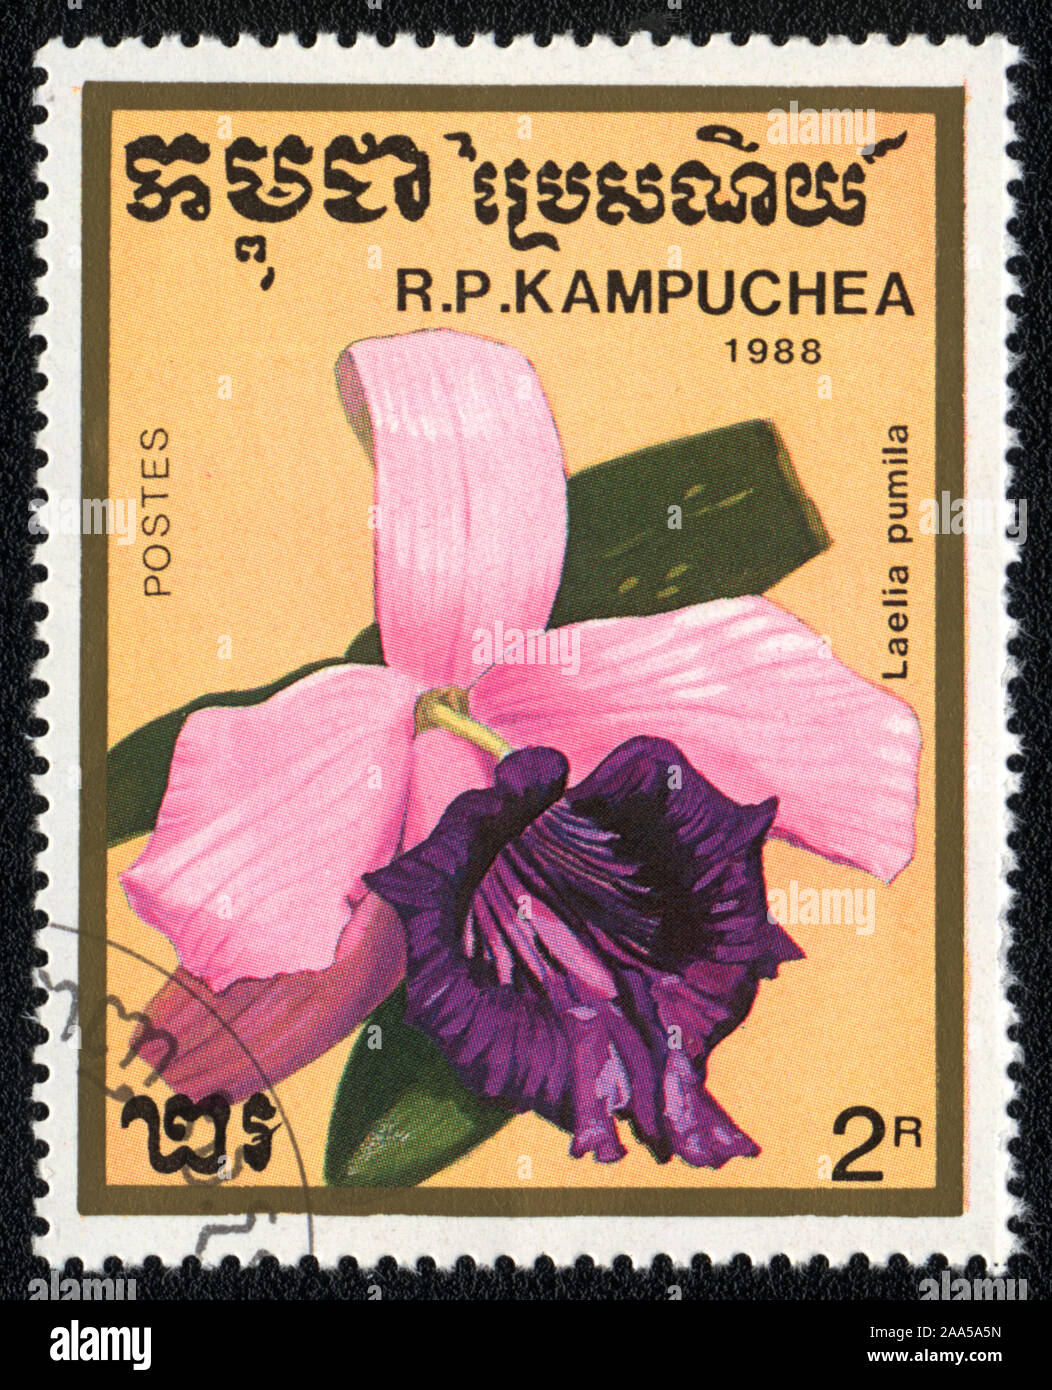 A stamp printed in Kampuchea shows flower orchid Dwarf Sophronitis or Laelia Pumila, 1988 Stock Photo